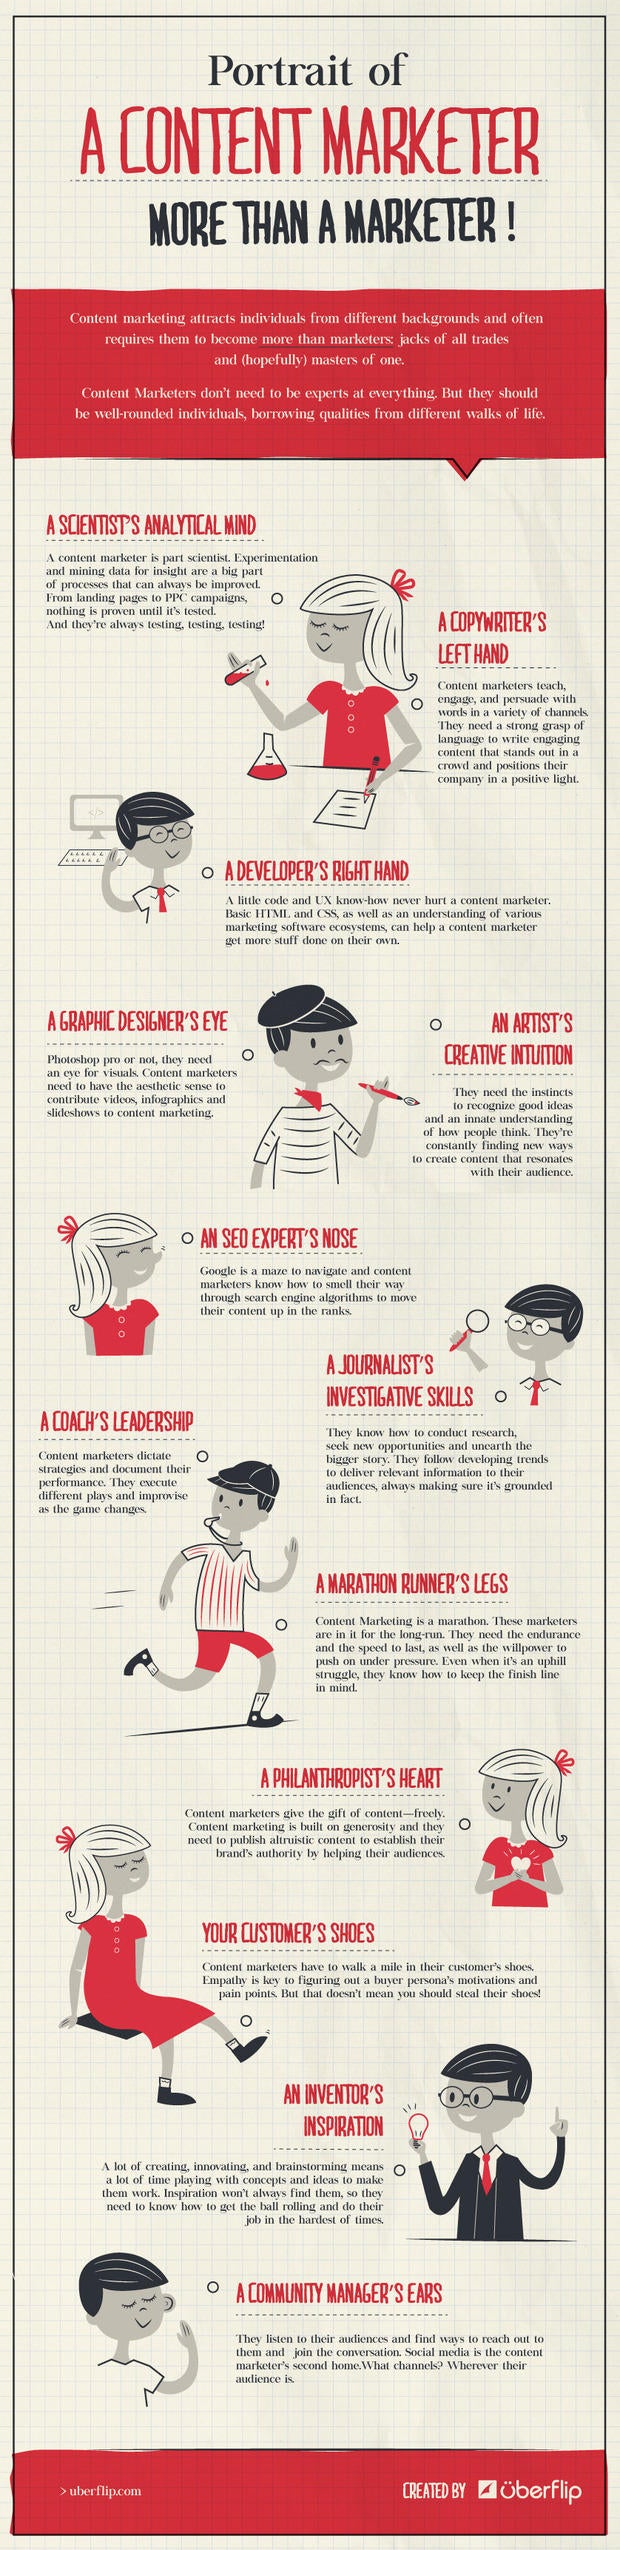 content marketer infographic